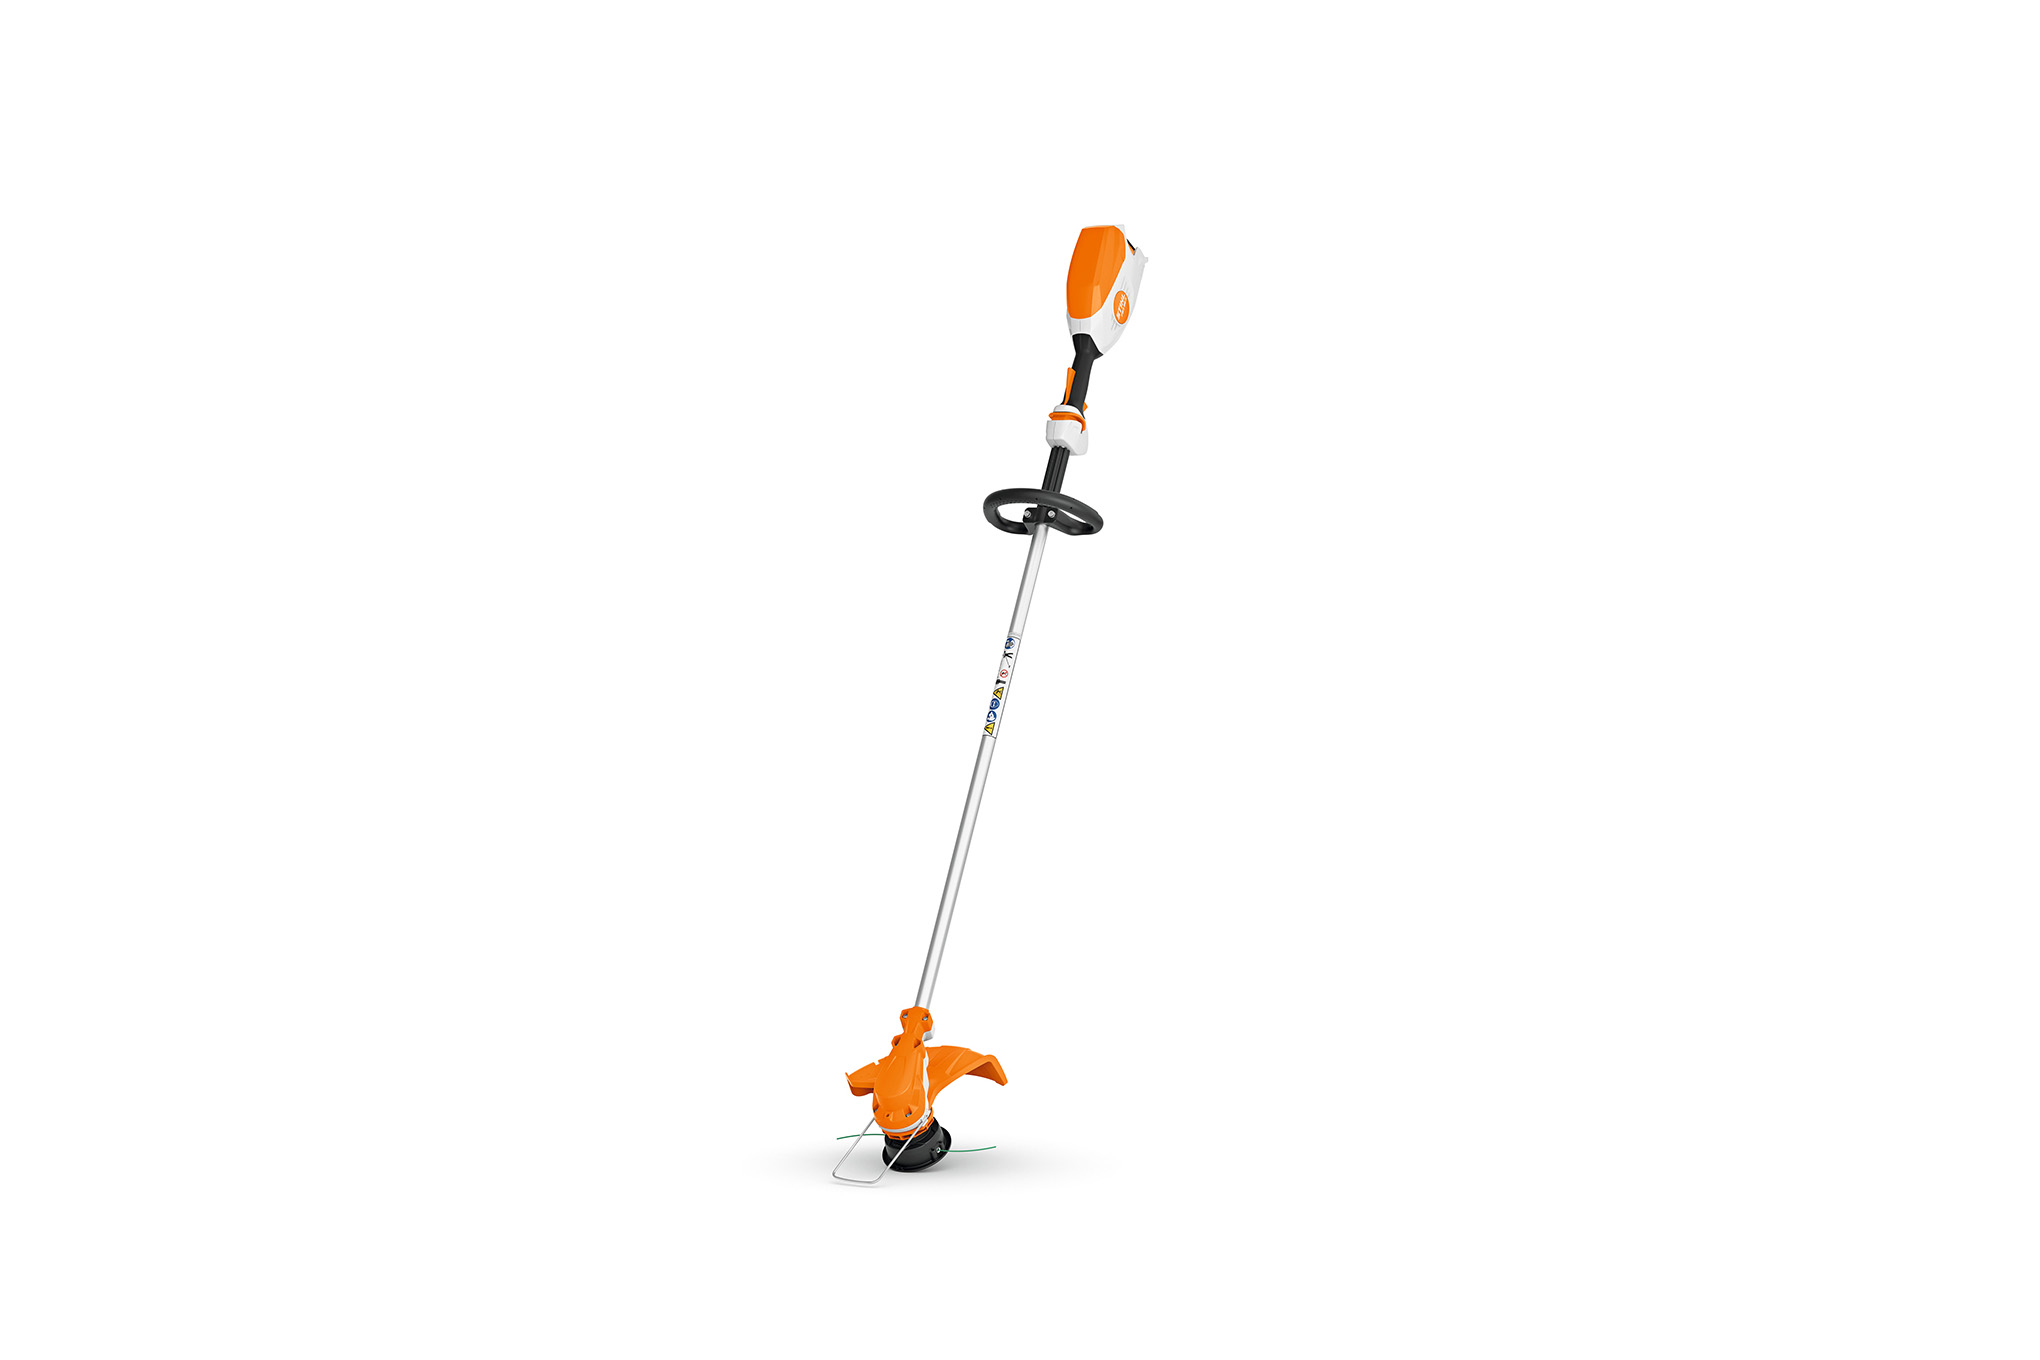 STIHL FSA 86 cordless brushcutter from the AP-System